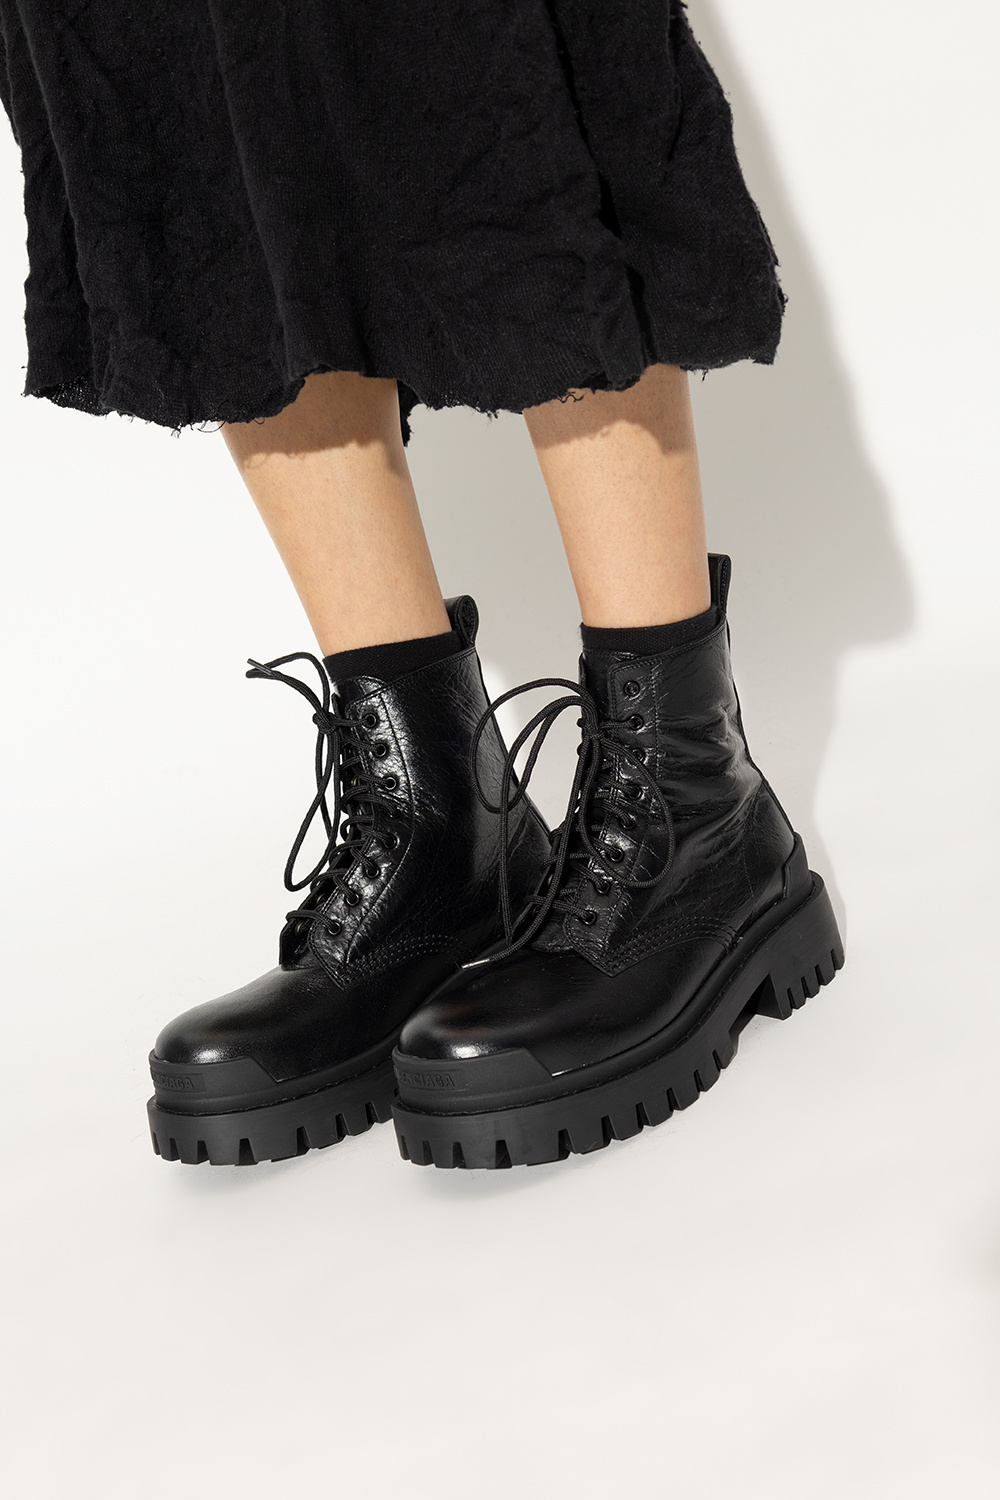 These Balenciaga boots are going to be the shoes of the Fall